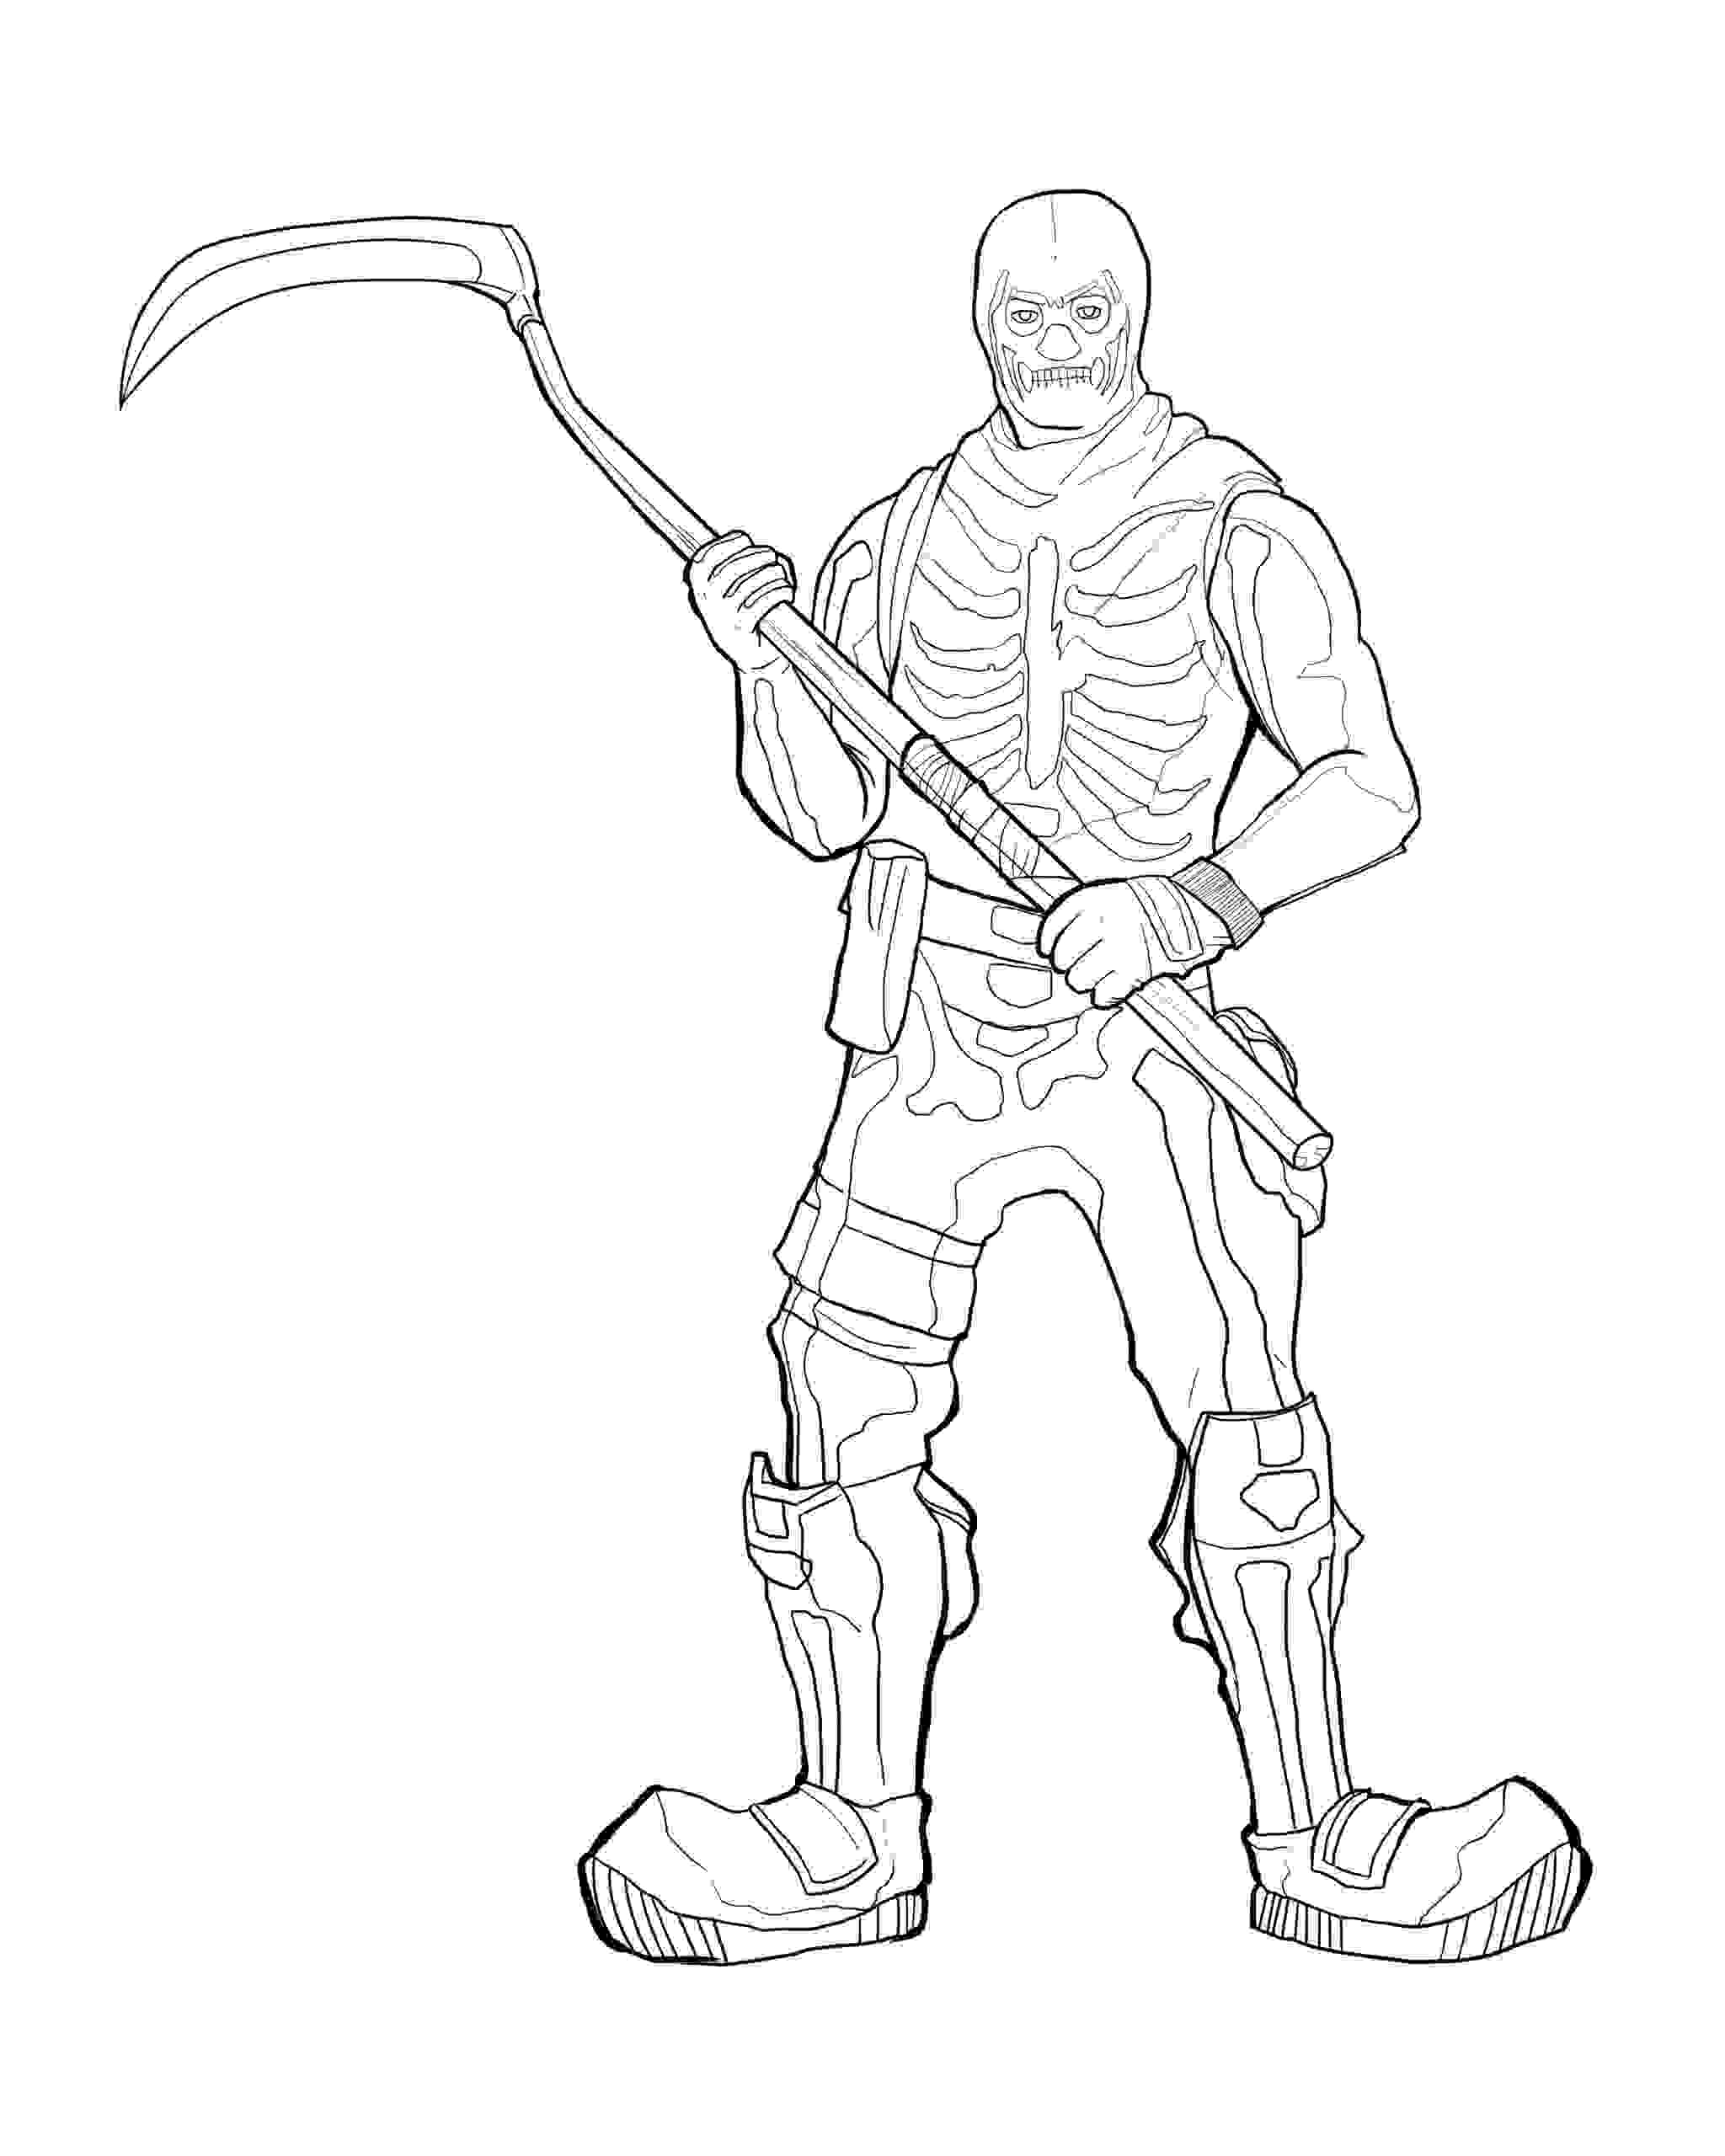 Skull Trooper has a Rare Harvesting Tool in Fortnite Coloring Pages -  Fortnite Coloring Pages - Coloring Pages For Kids And Adults